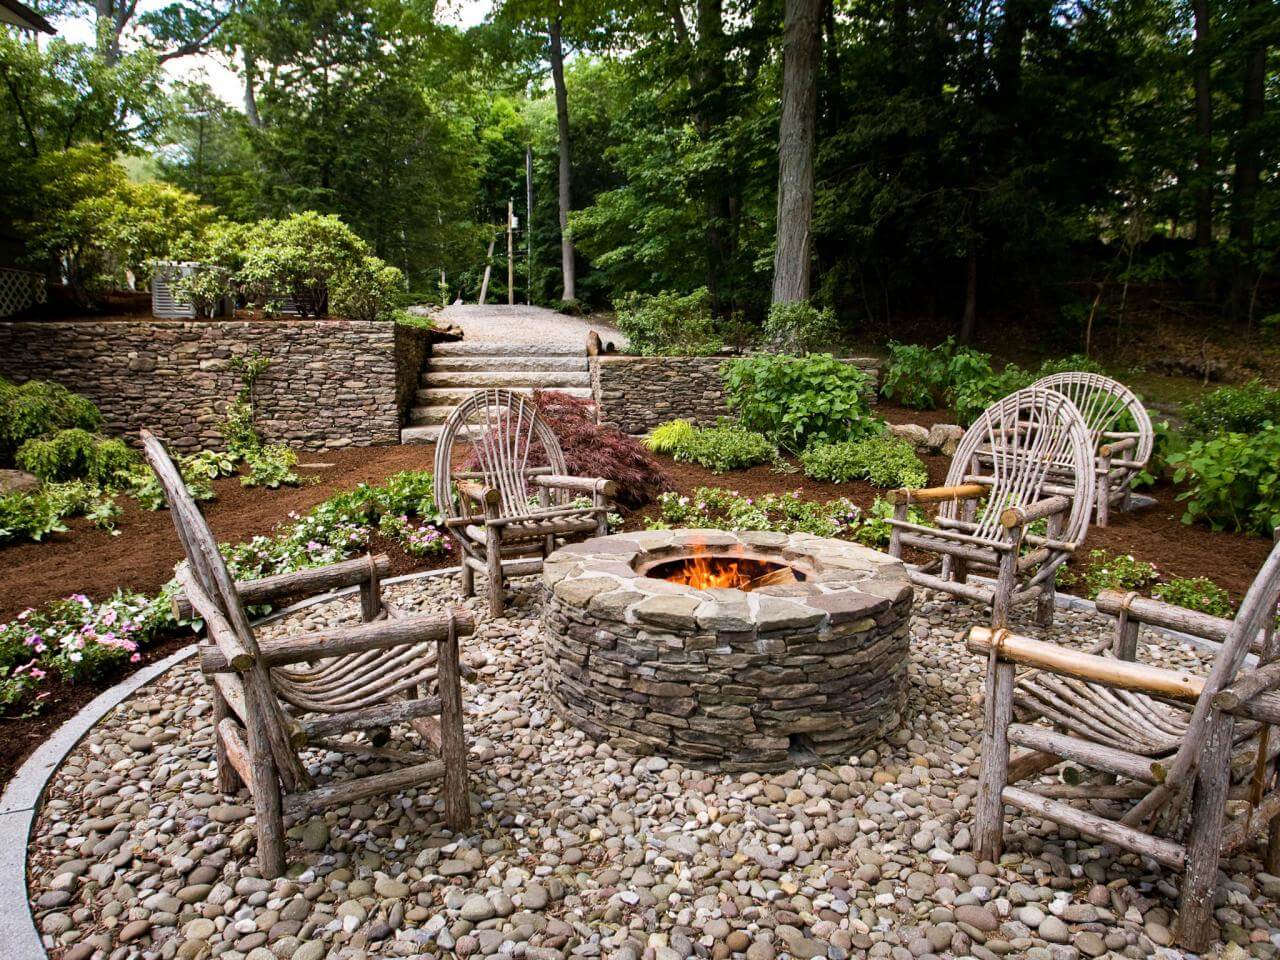 Wooden Seats Around a Stone Firepit